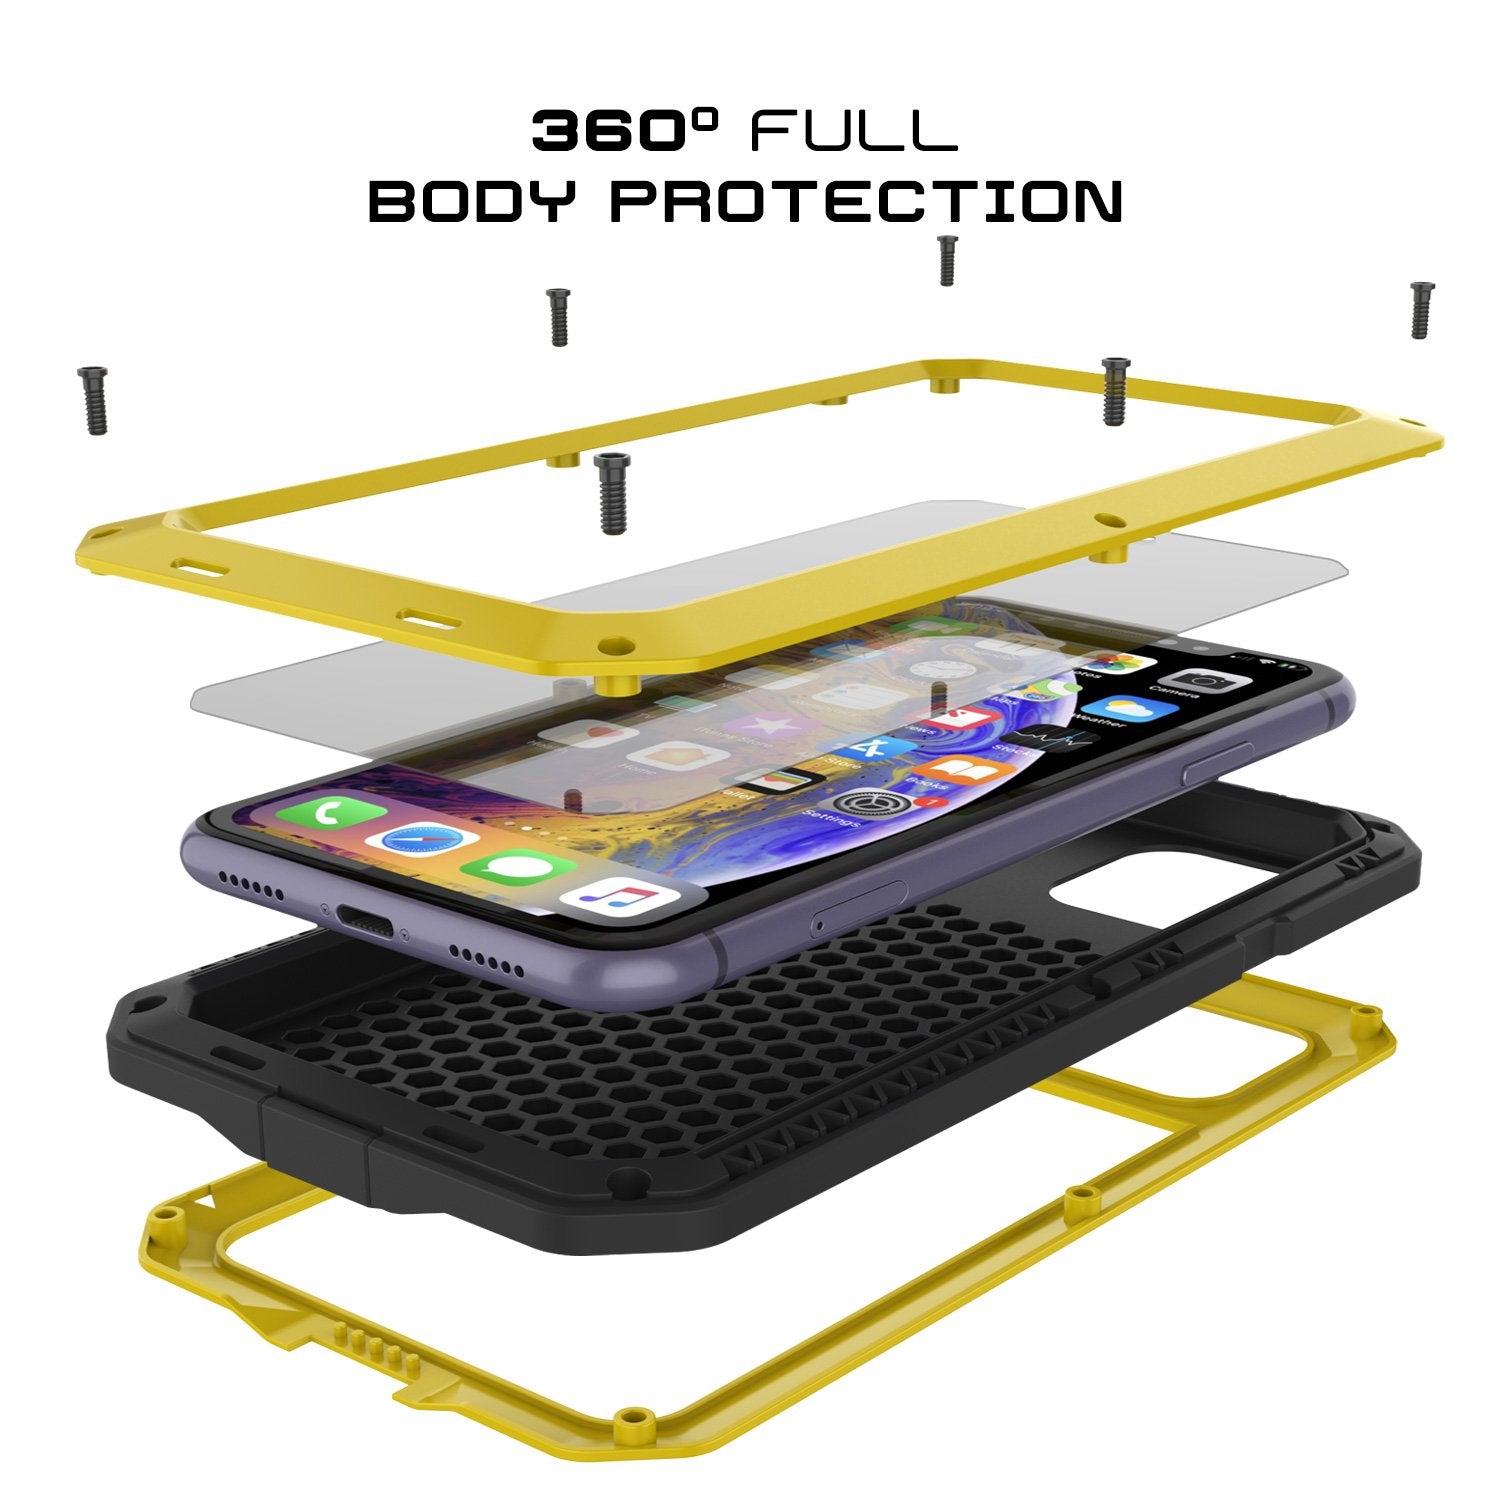 iPhone 11 Metal Case, Heavy Duty Military Grade Armor Cover [shock proof] Full Body Hard [Neon]